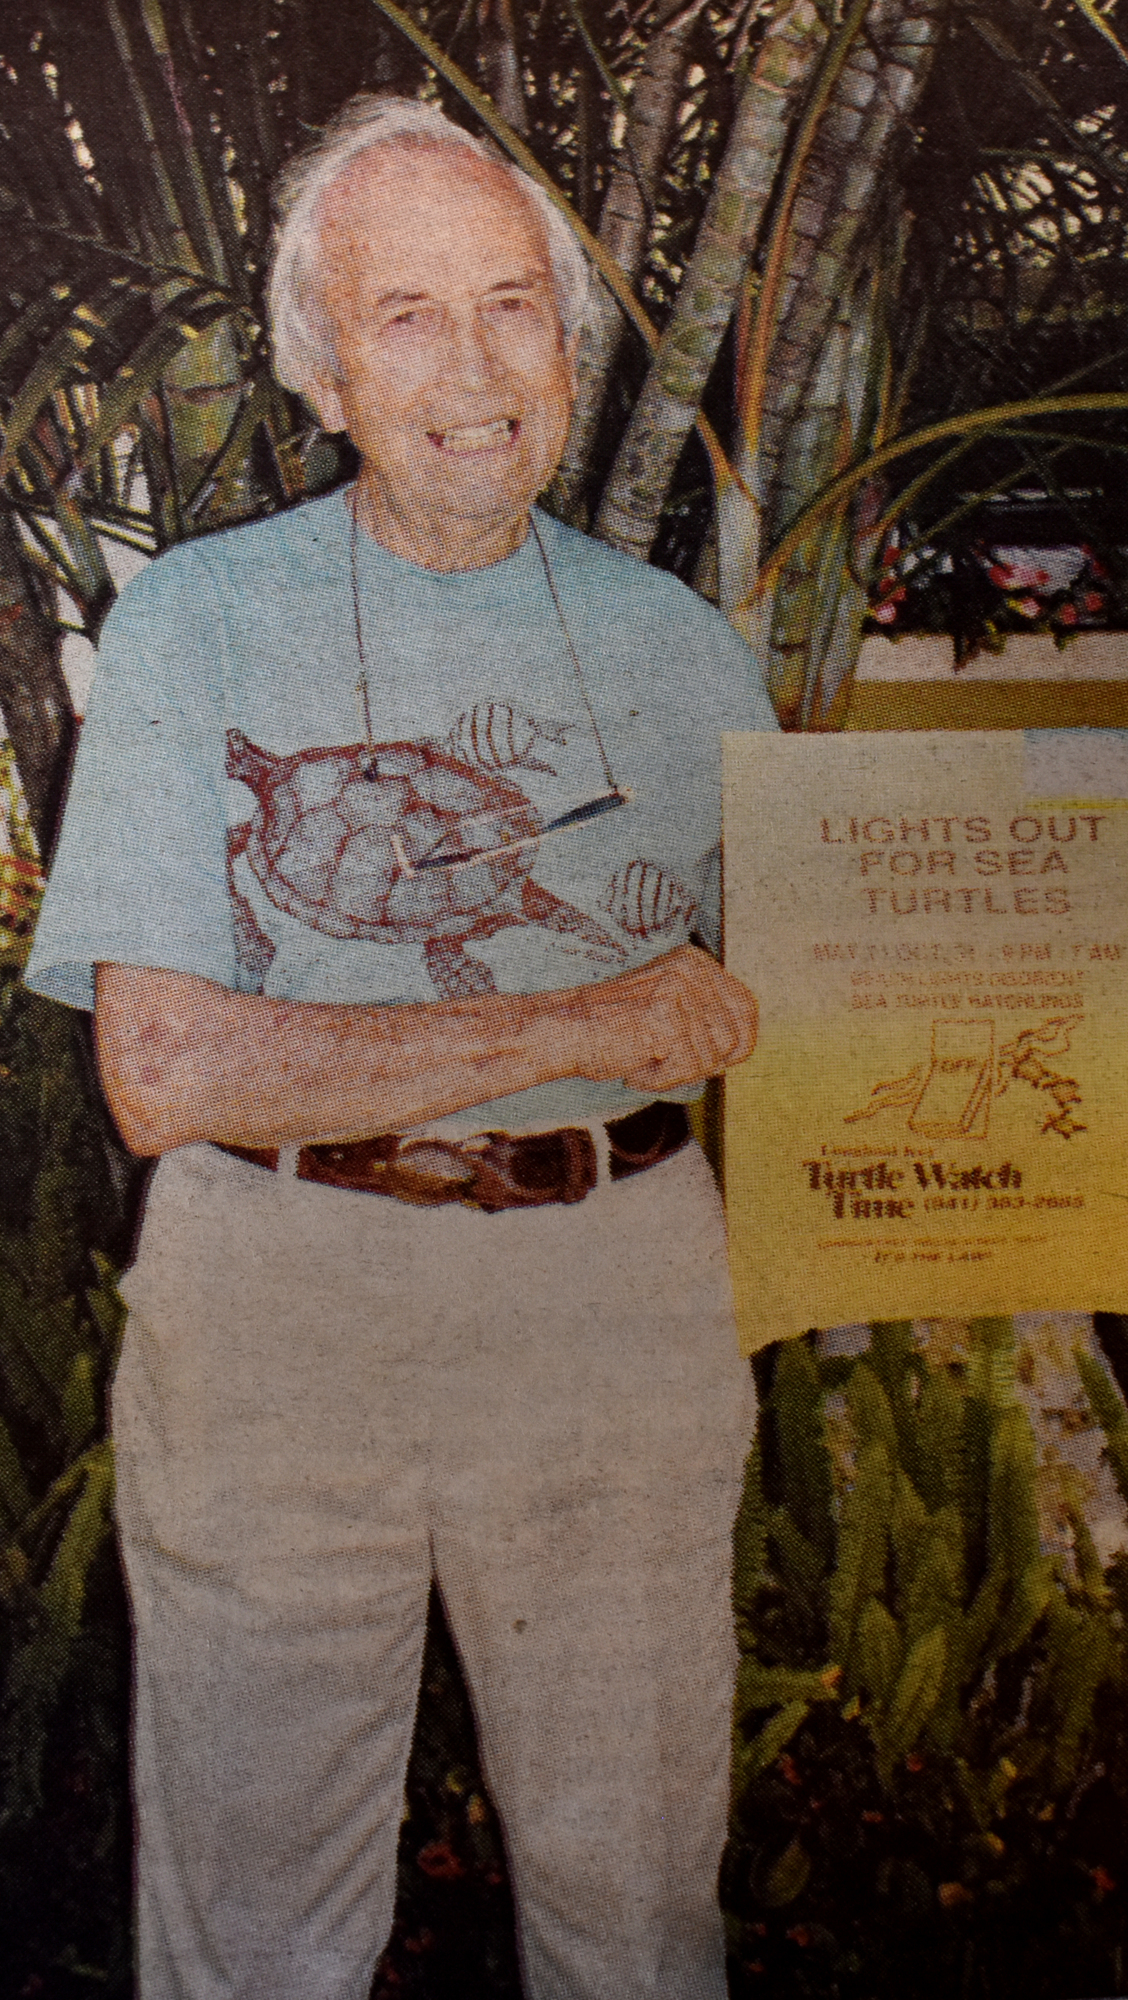 Orville Clayton officially founded the Longboat Key Turtle Watch in 1969.